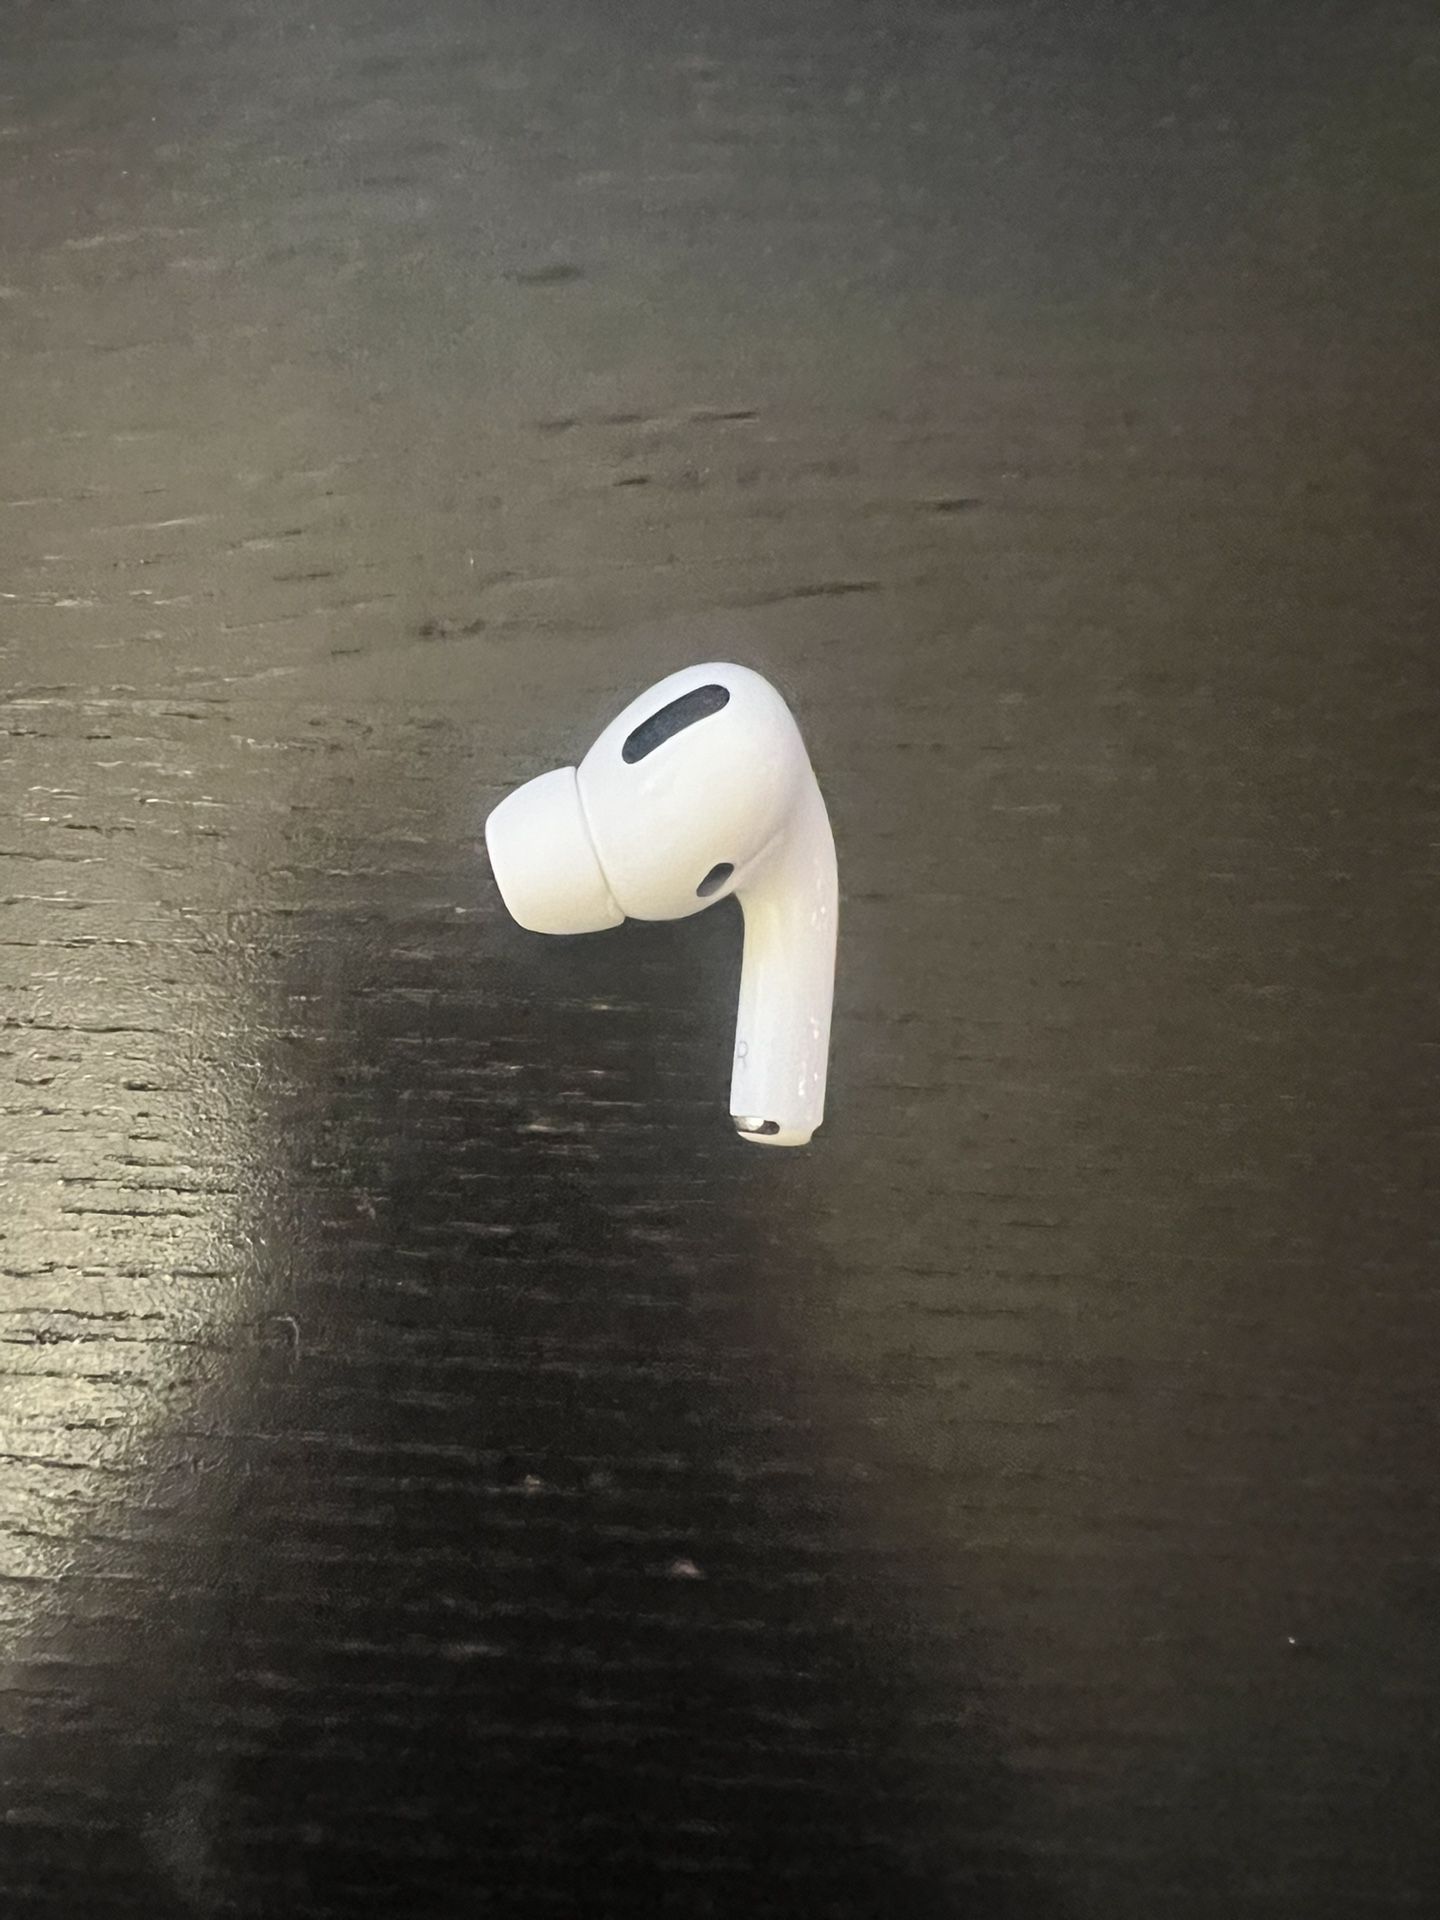 Apple Airpod Pro (Right) A2083 Excellent Condition 